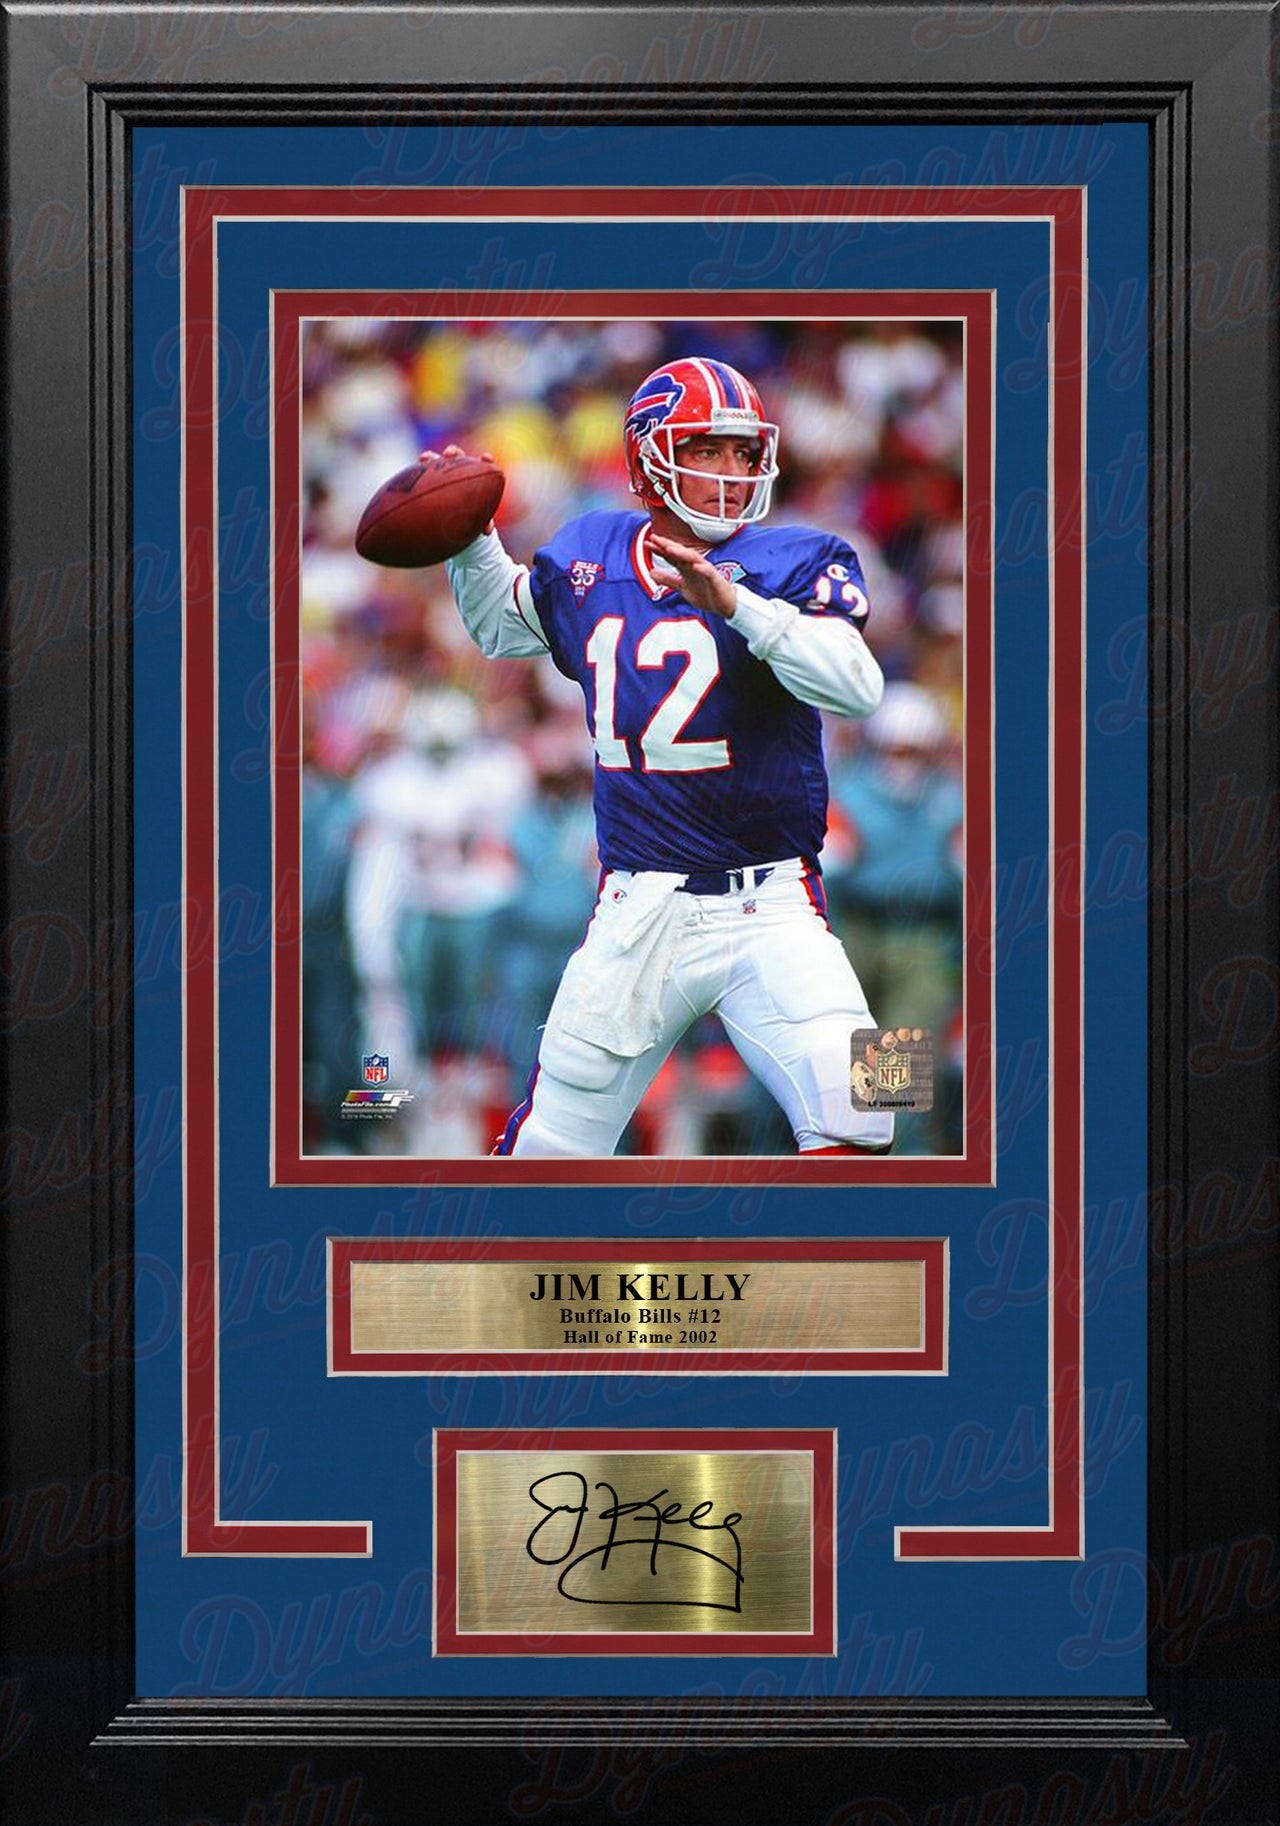 Jim Kelly in Action Buffalo Bills 8" x 10" Framed Football Photo with Engraved Autograph